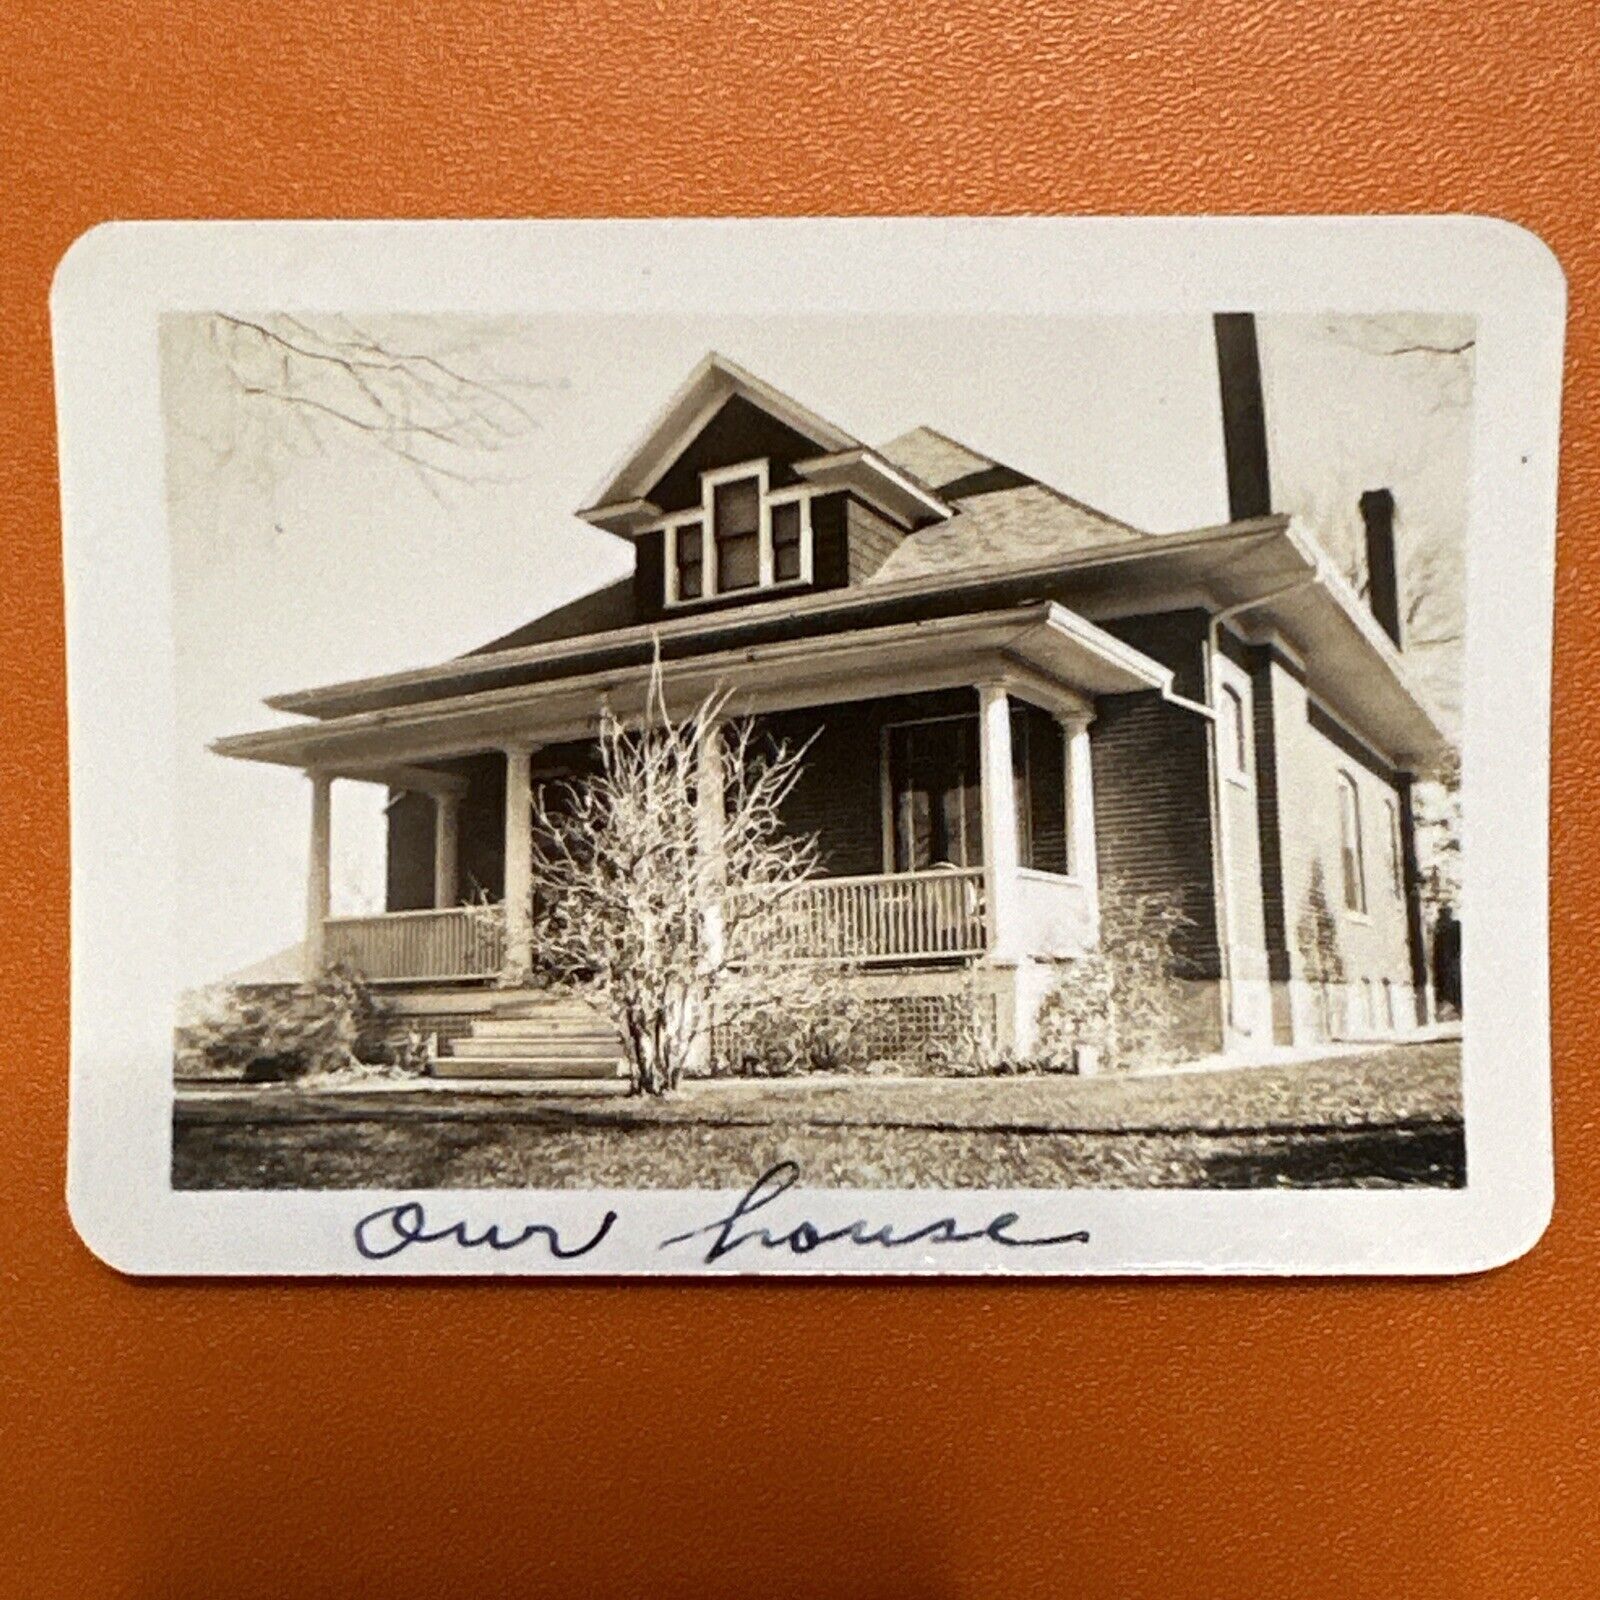 “Our Home” VINTAGE PHOTO 1940 Original Snapshot Sweet American House